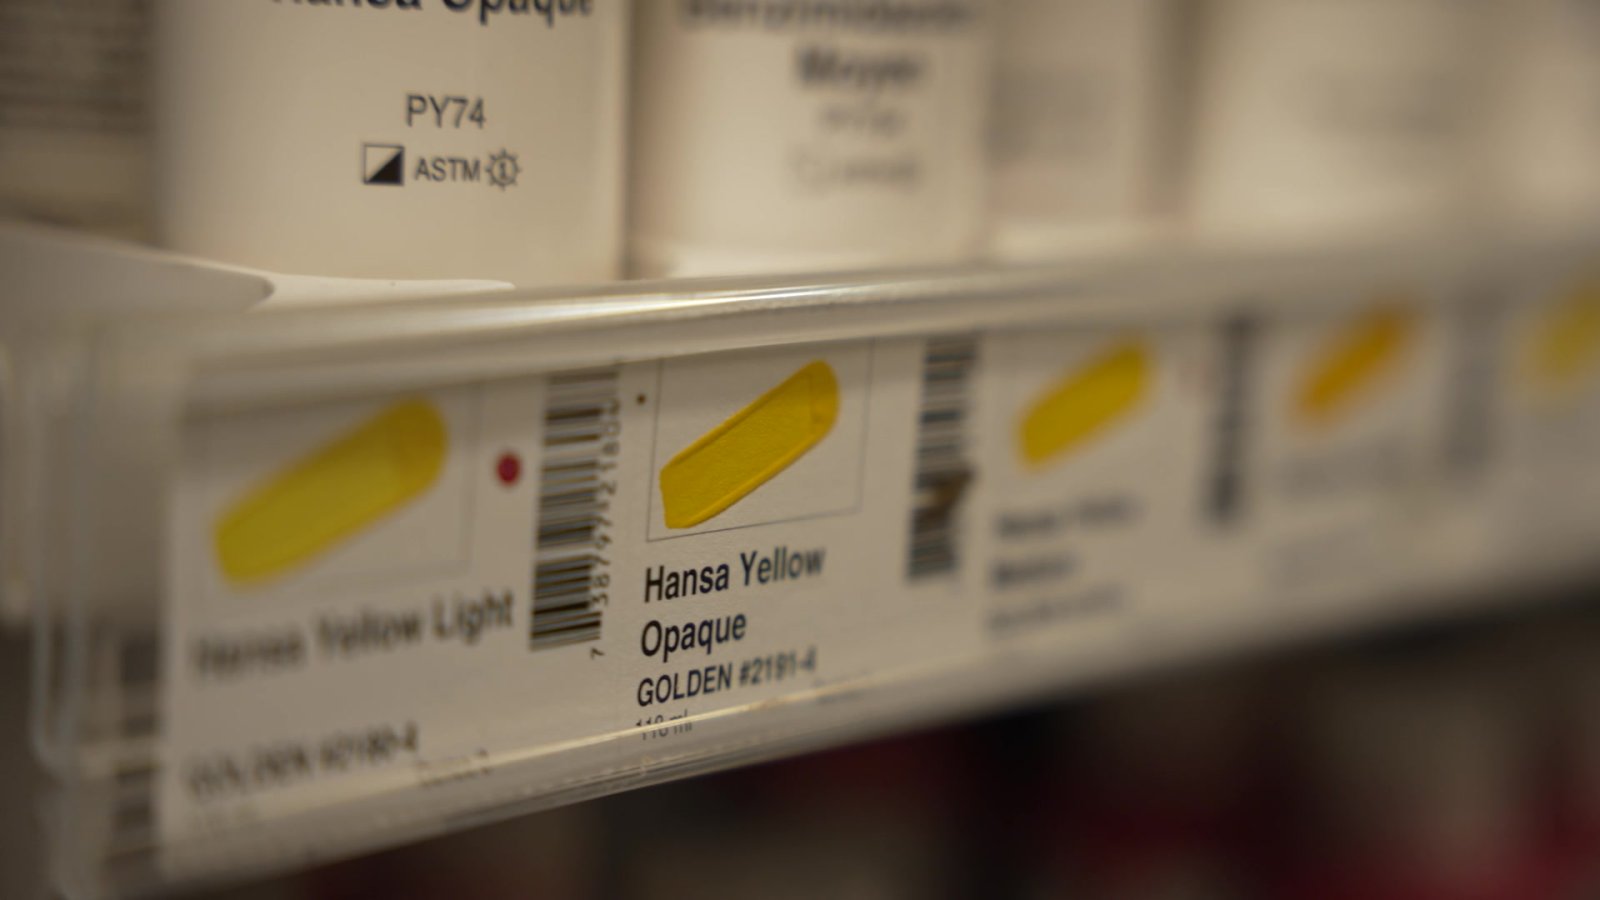 Similar shades of yellow paint on art store shelves.